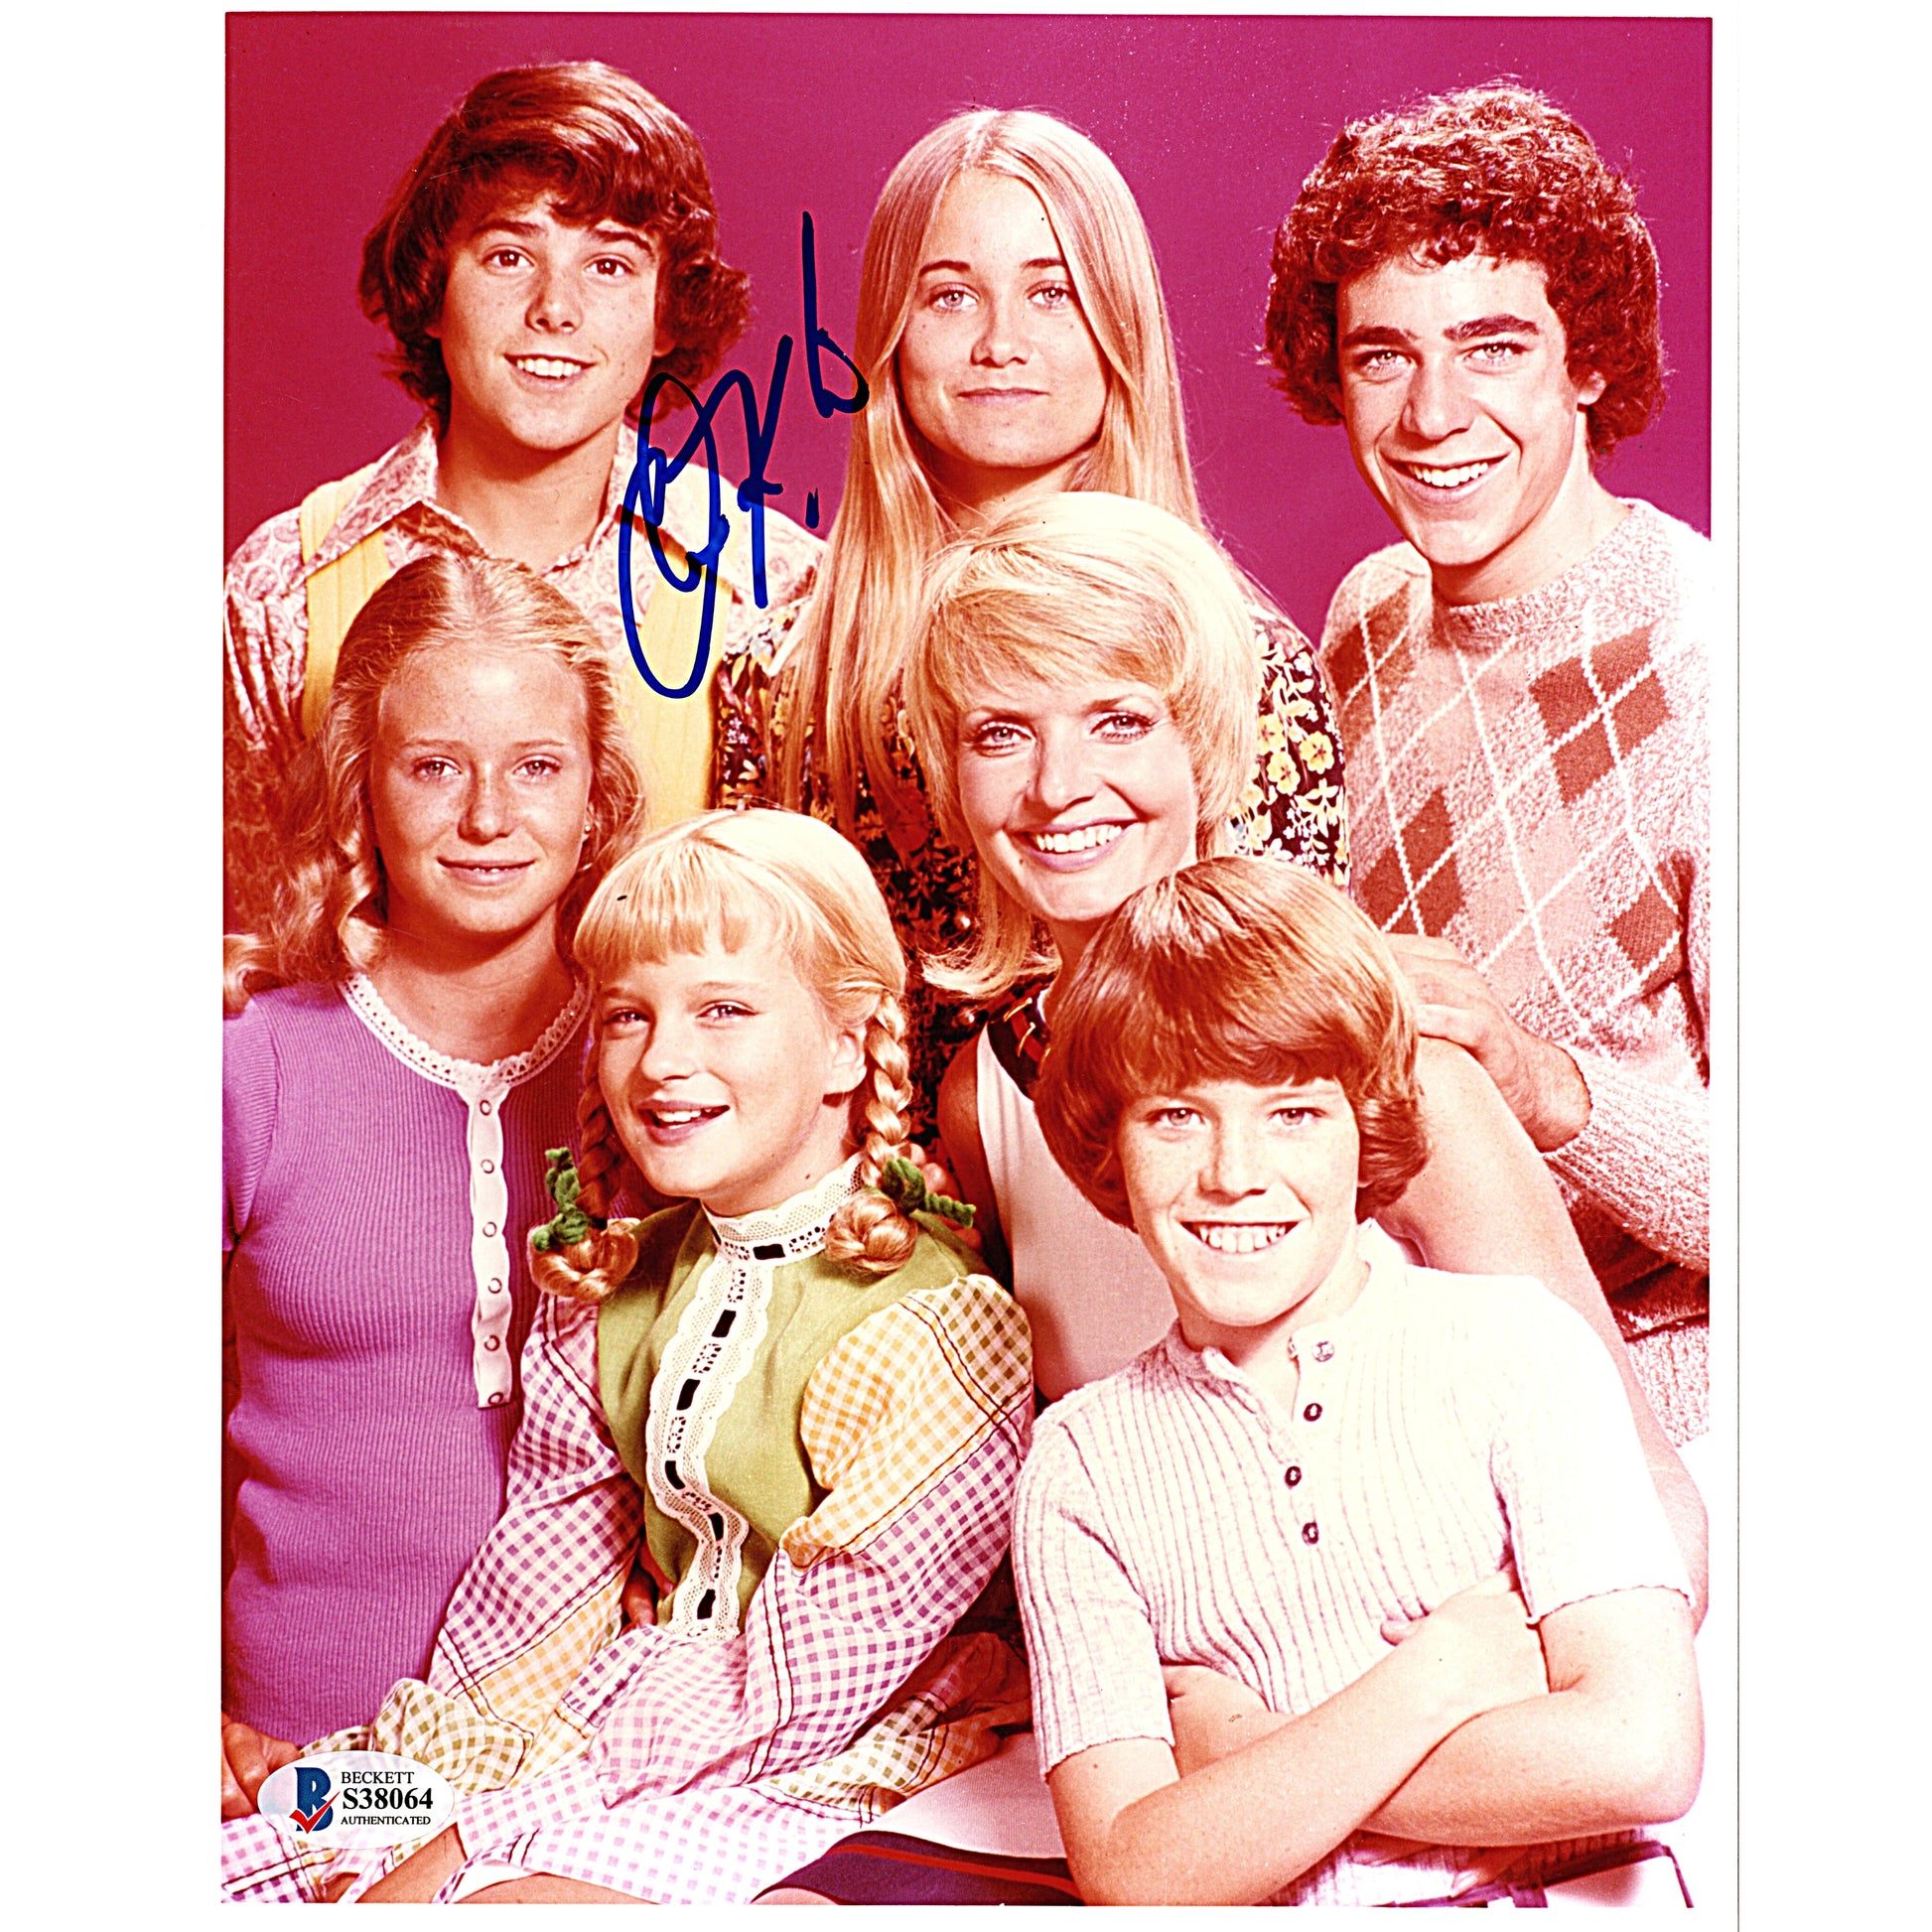 Hollywood- Autographed- Christopher Knight Signed The Brady Bunch Cast 8x10 Photo Beckett Authentication Services BAS S38064 - 103